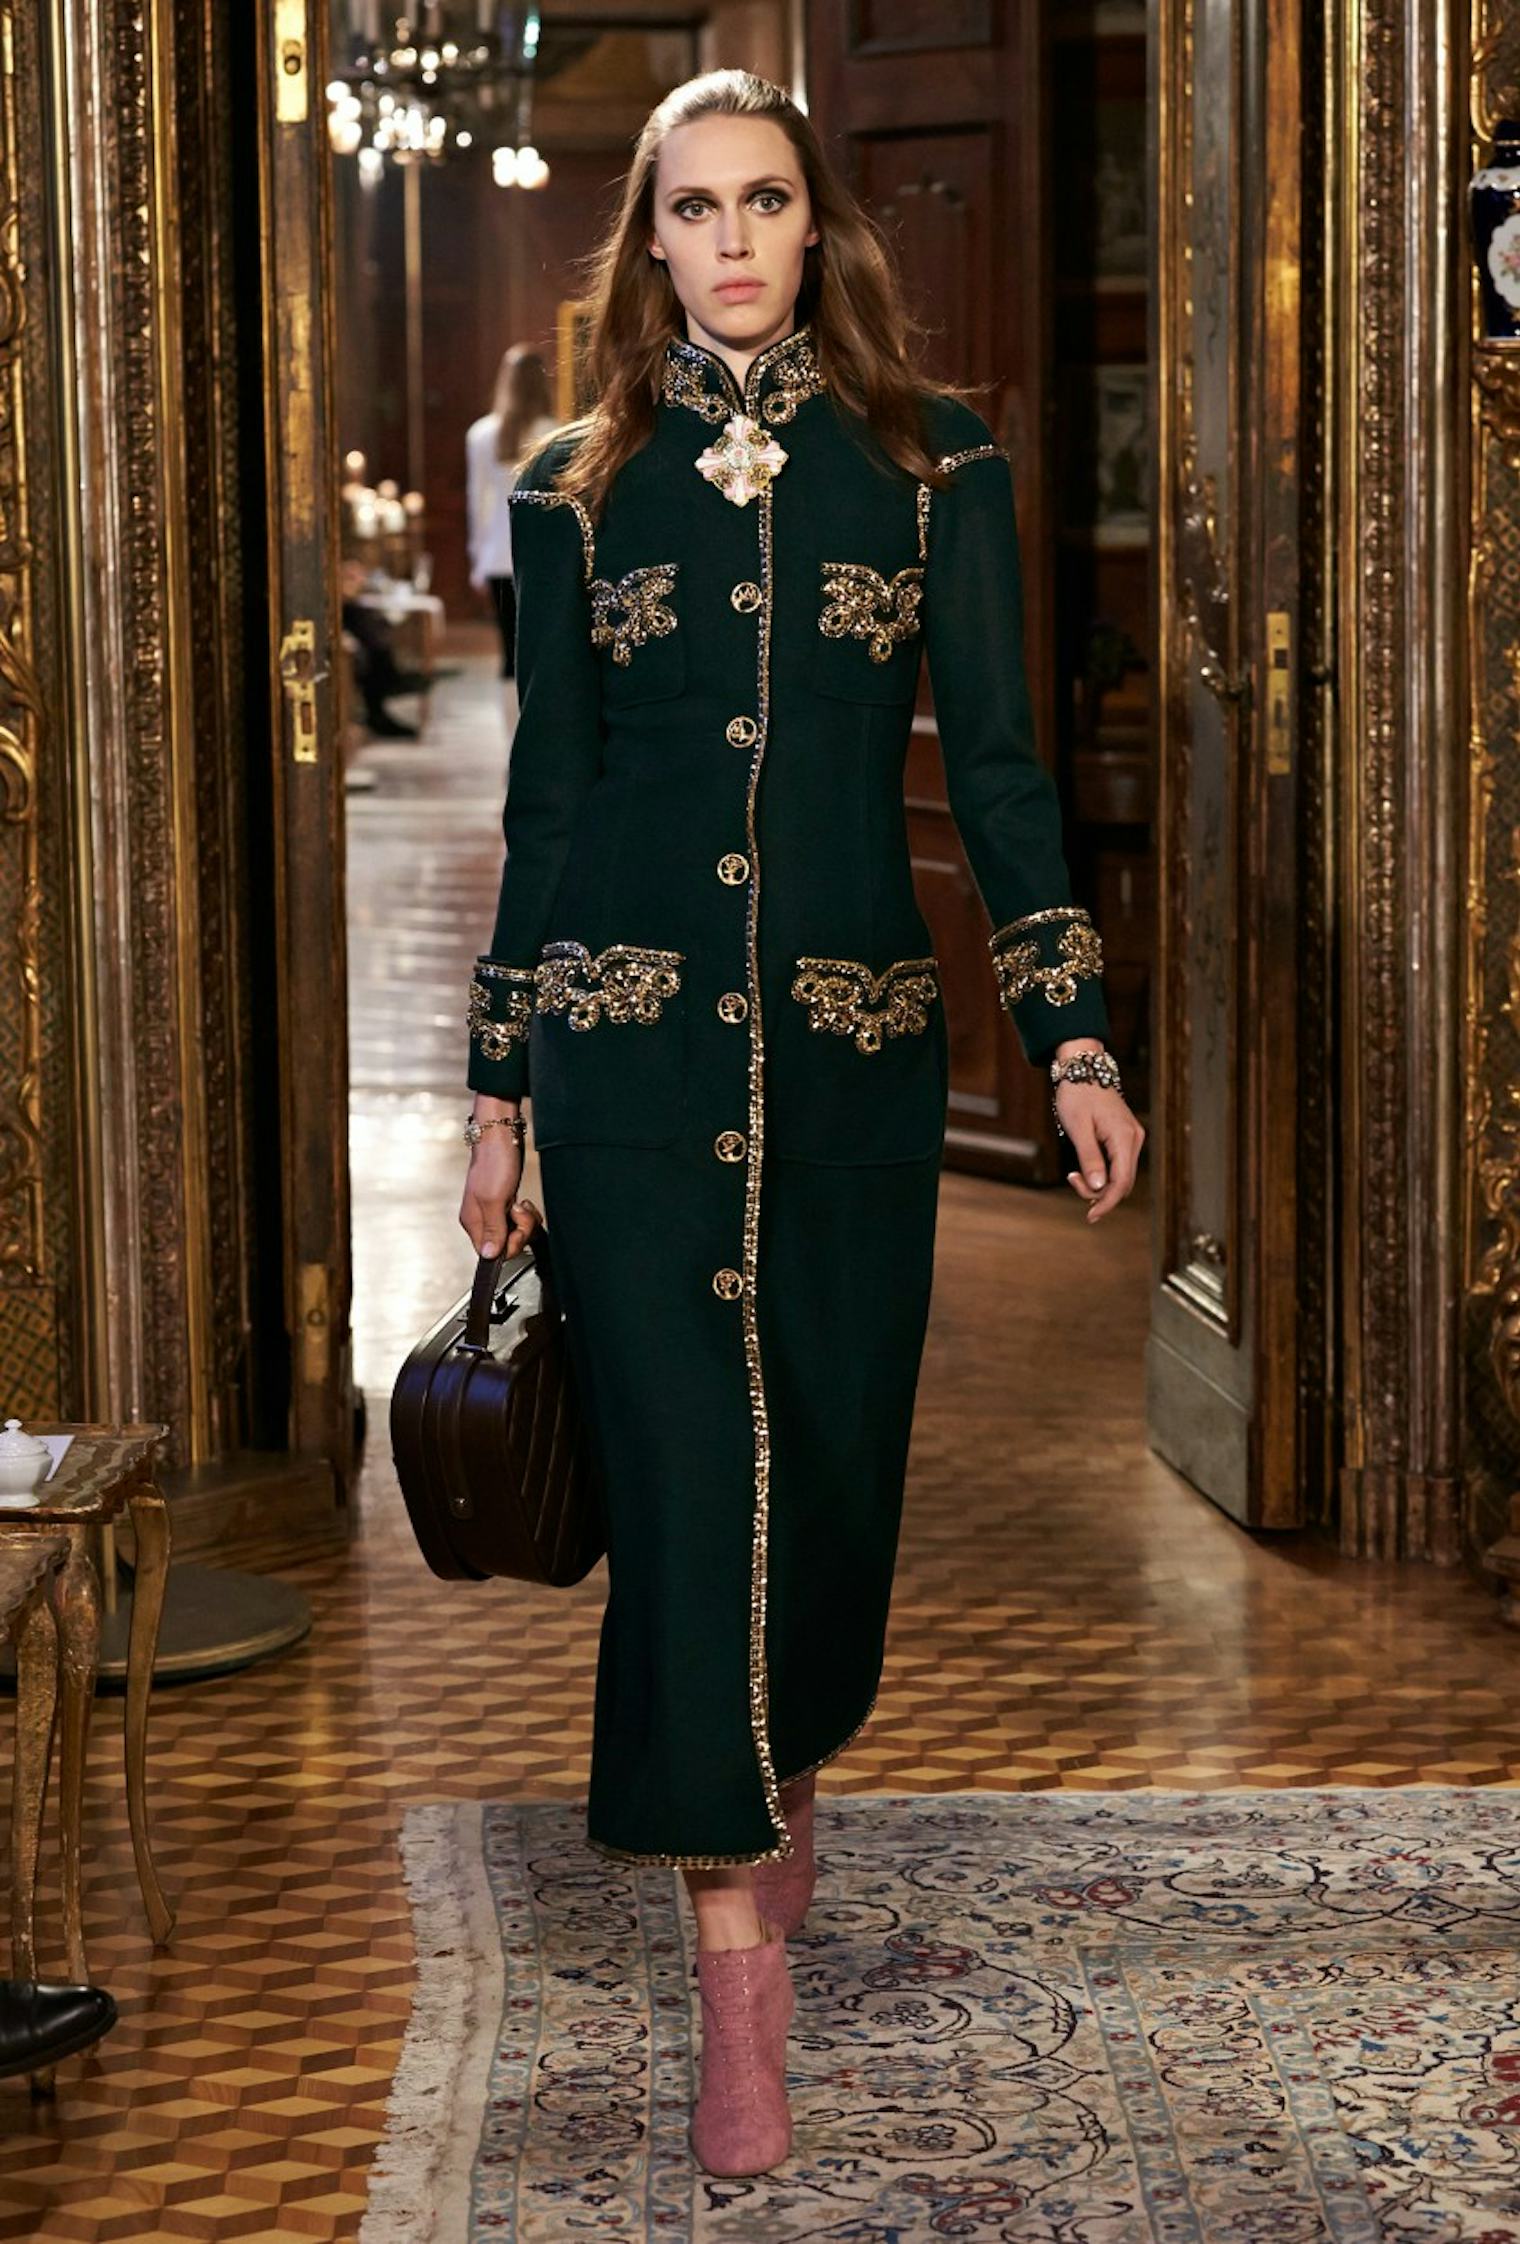 Chanel’s New Collection Is A Jaw Dropper